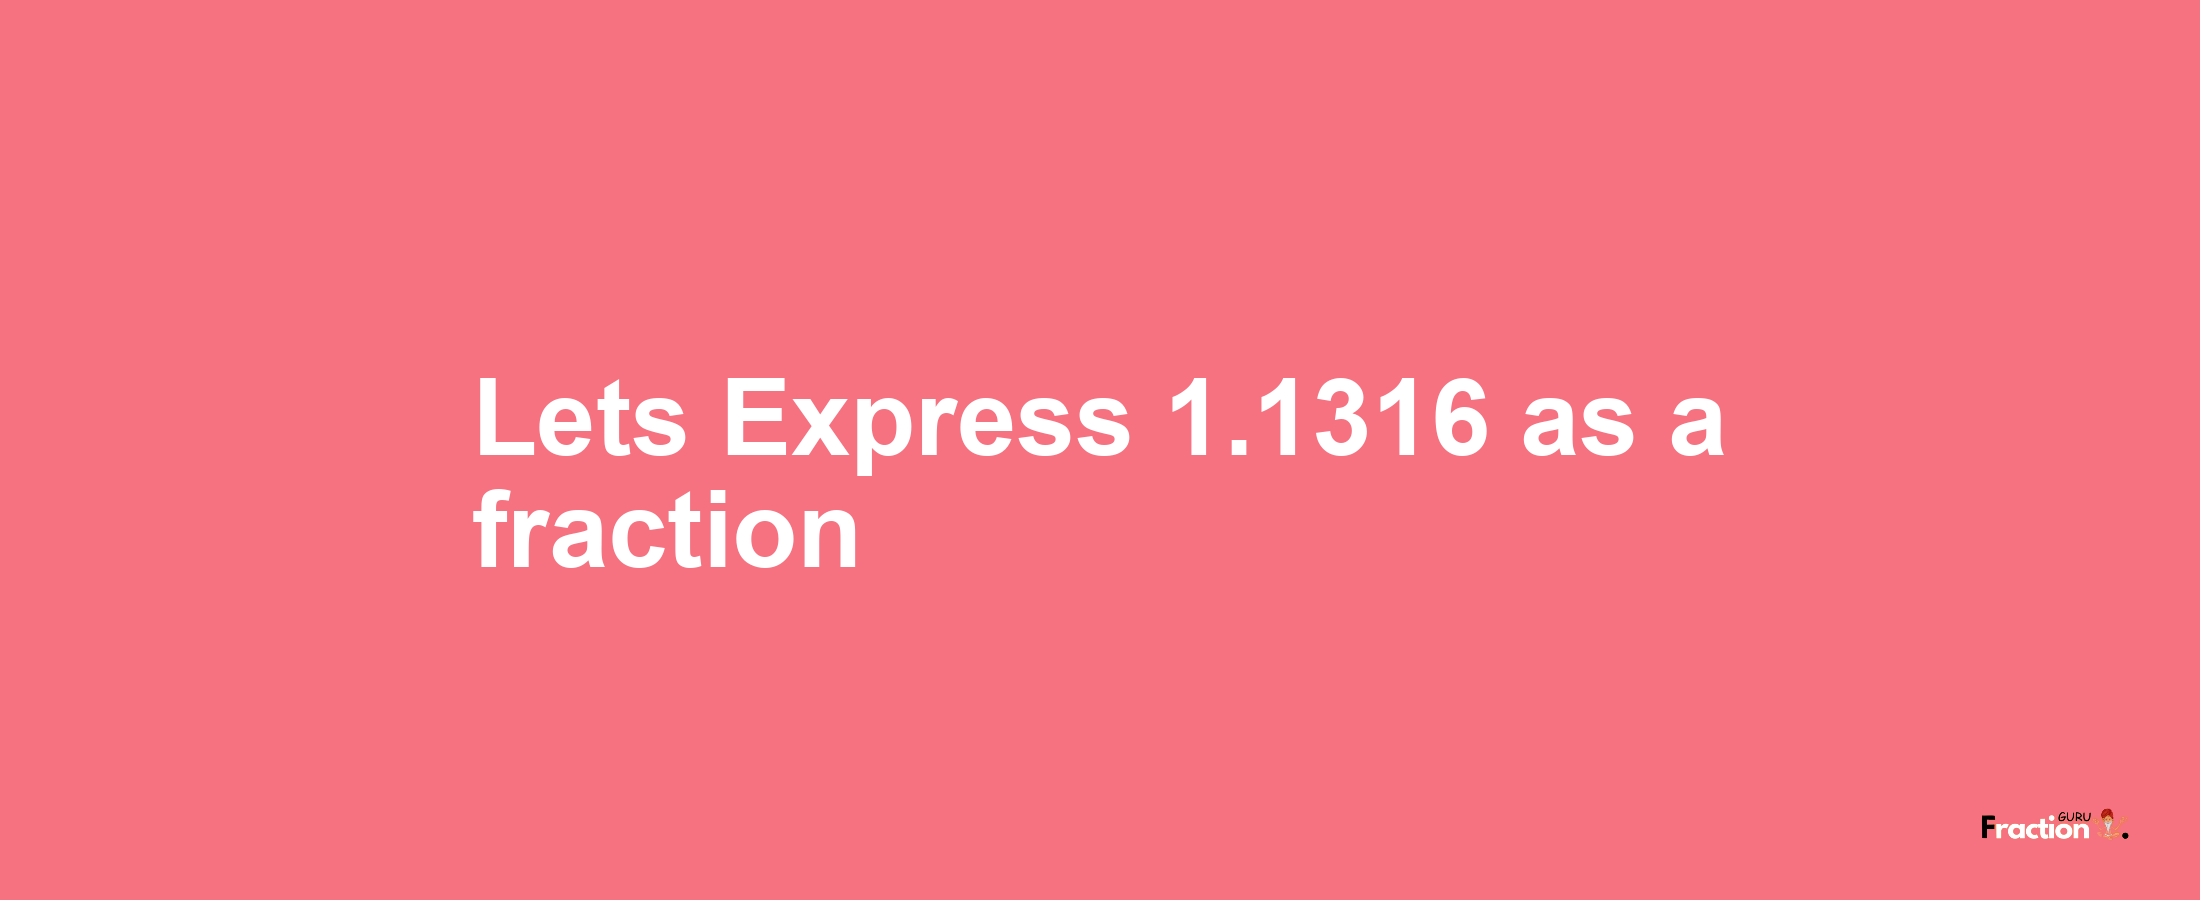 Lets Express 1.1316 as afraction